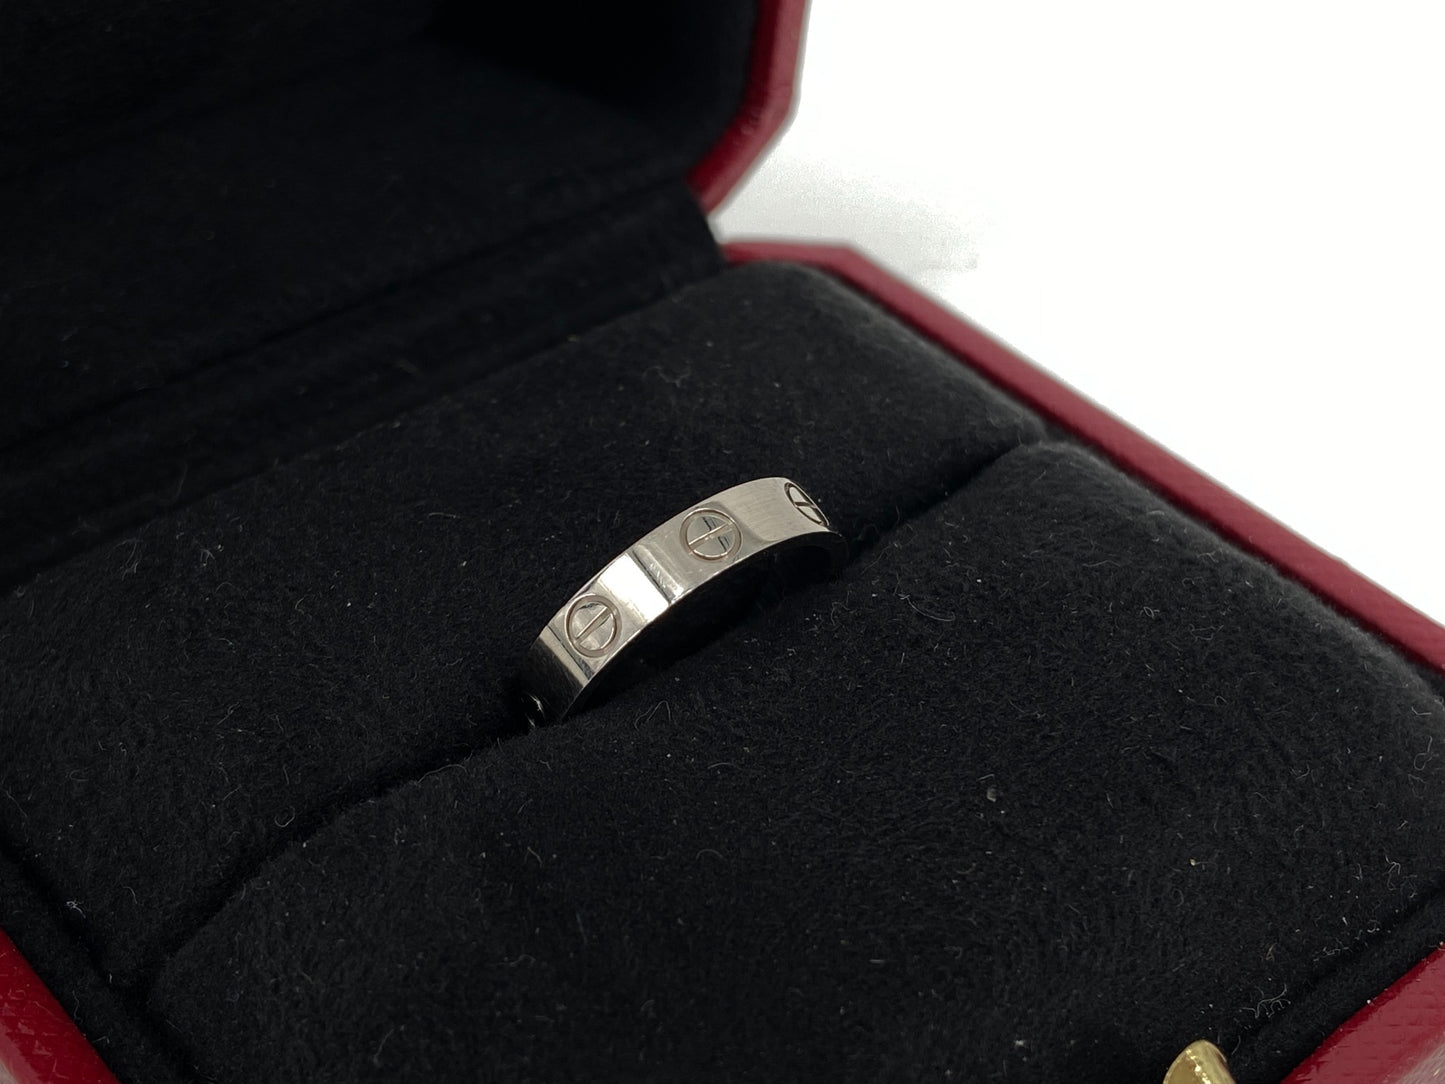 Cartier Love Ring White Gold Size 50 inc. Box